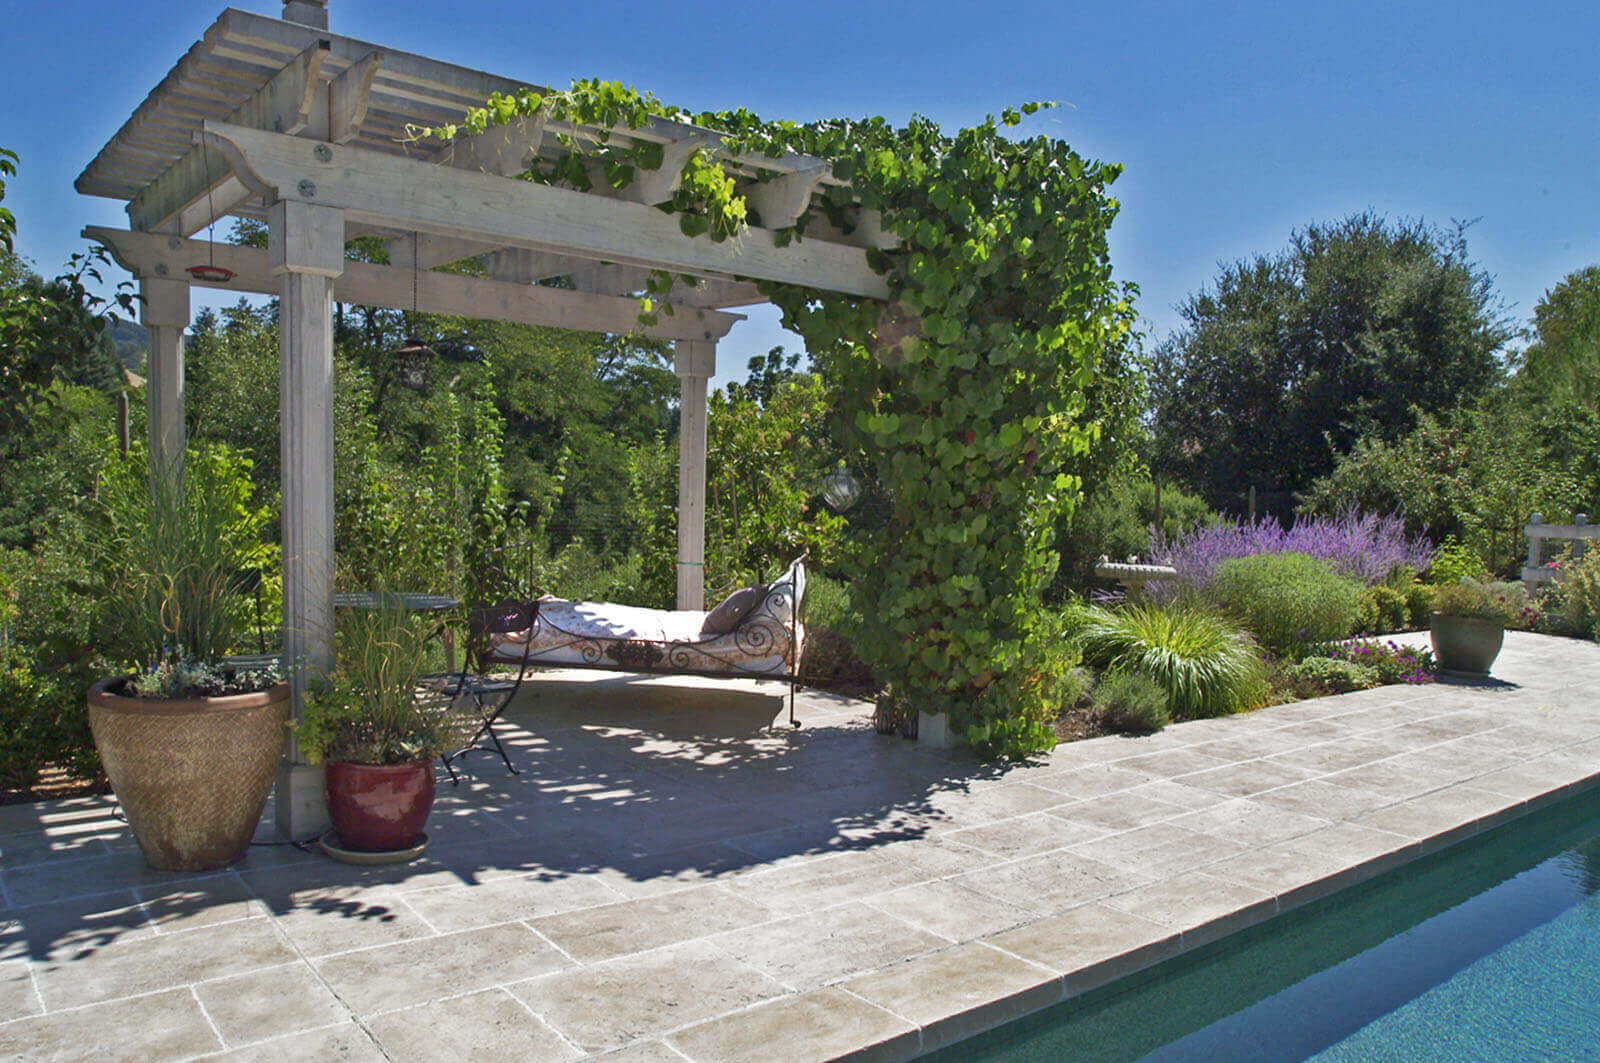 Classic white wood pergola with trained grapevine shelters poolside seating, with eclectic planted pots and colorful California-style garden